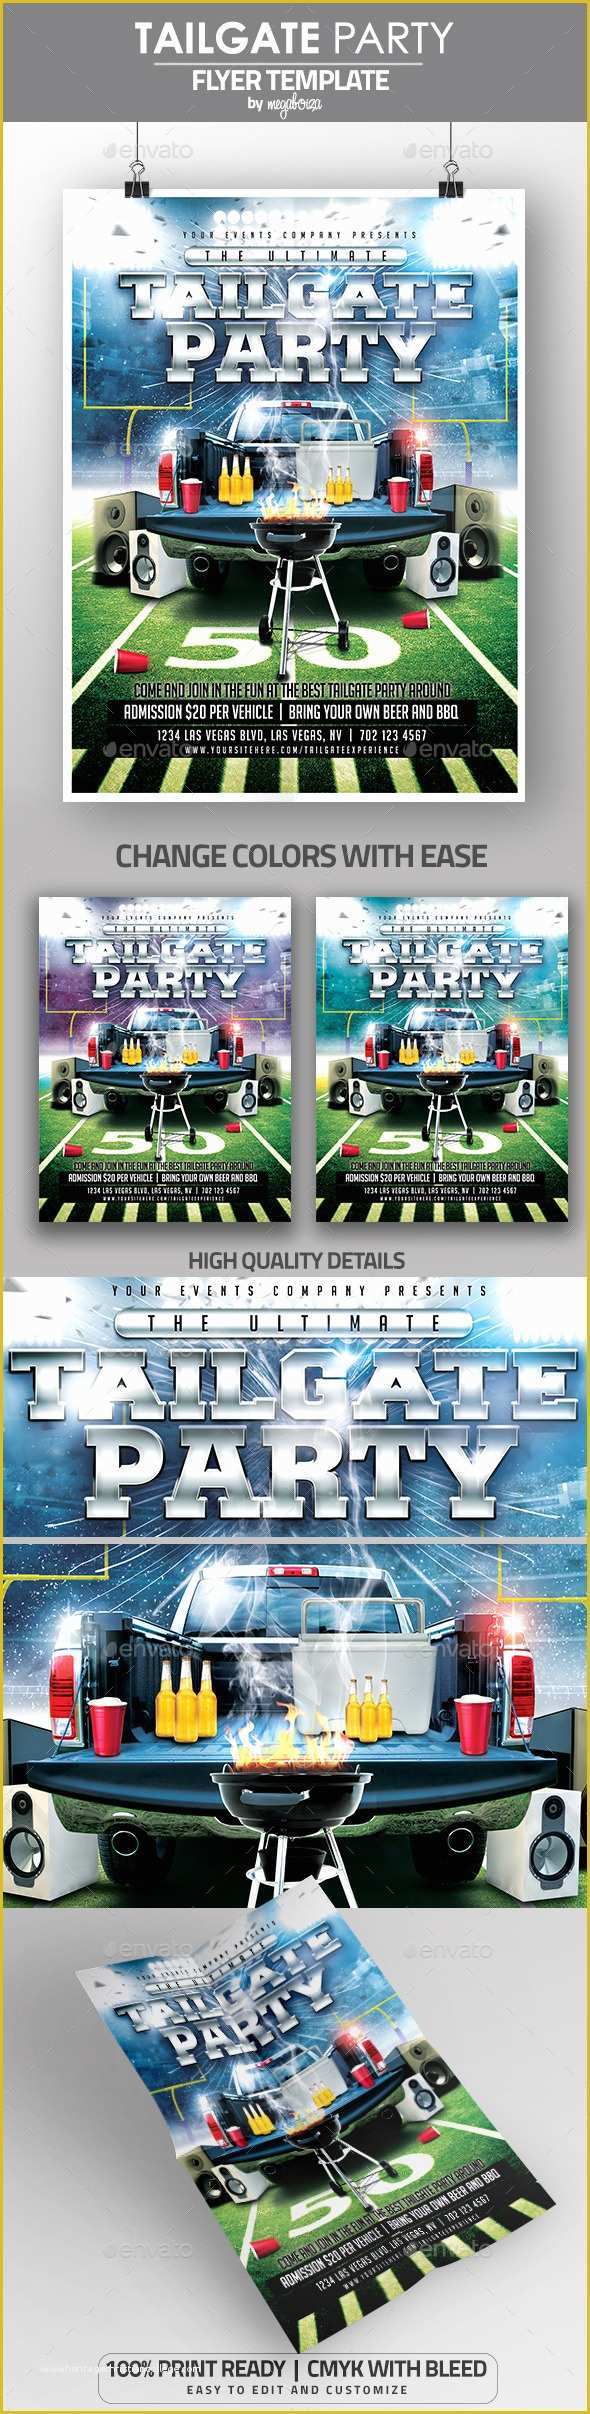 Free Tailgate Party Flyer Template Of Free Tailgate Templates Chreagle